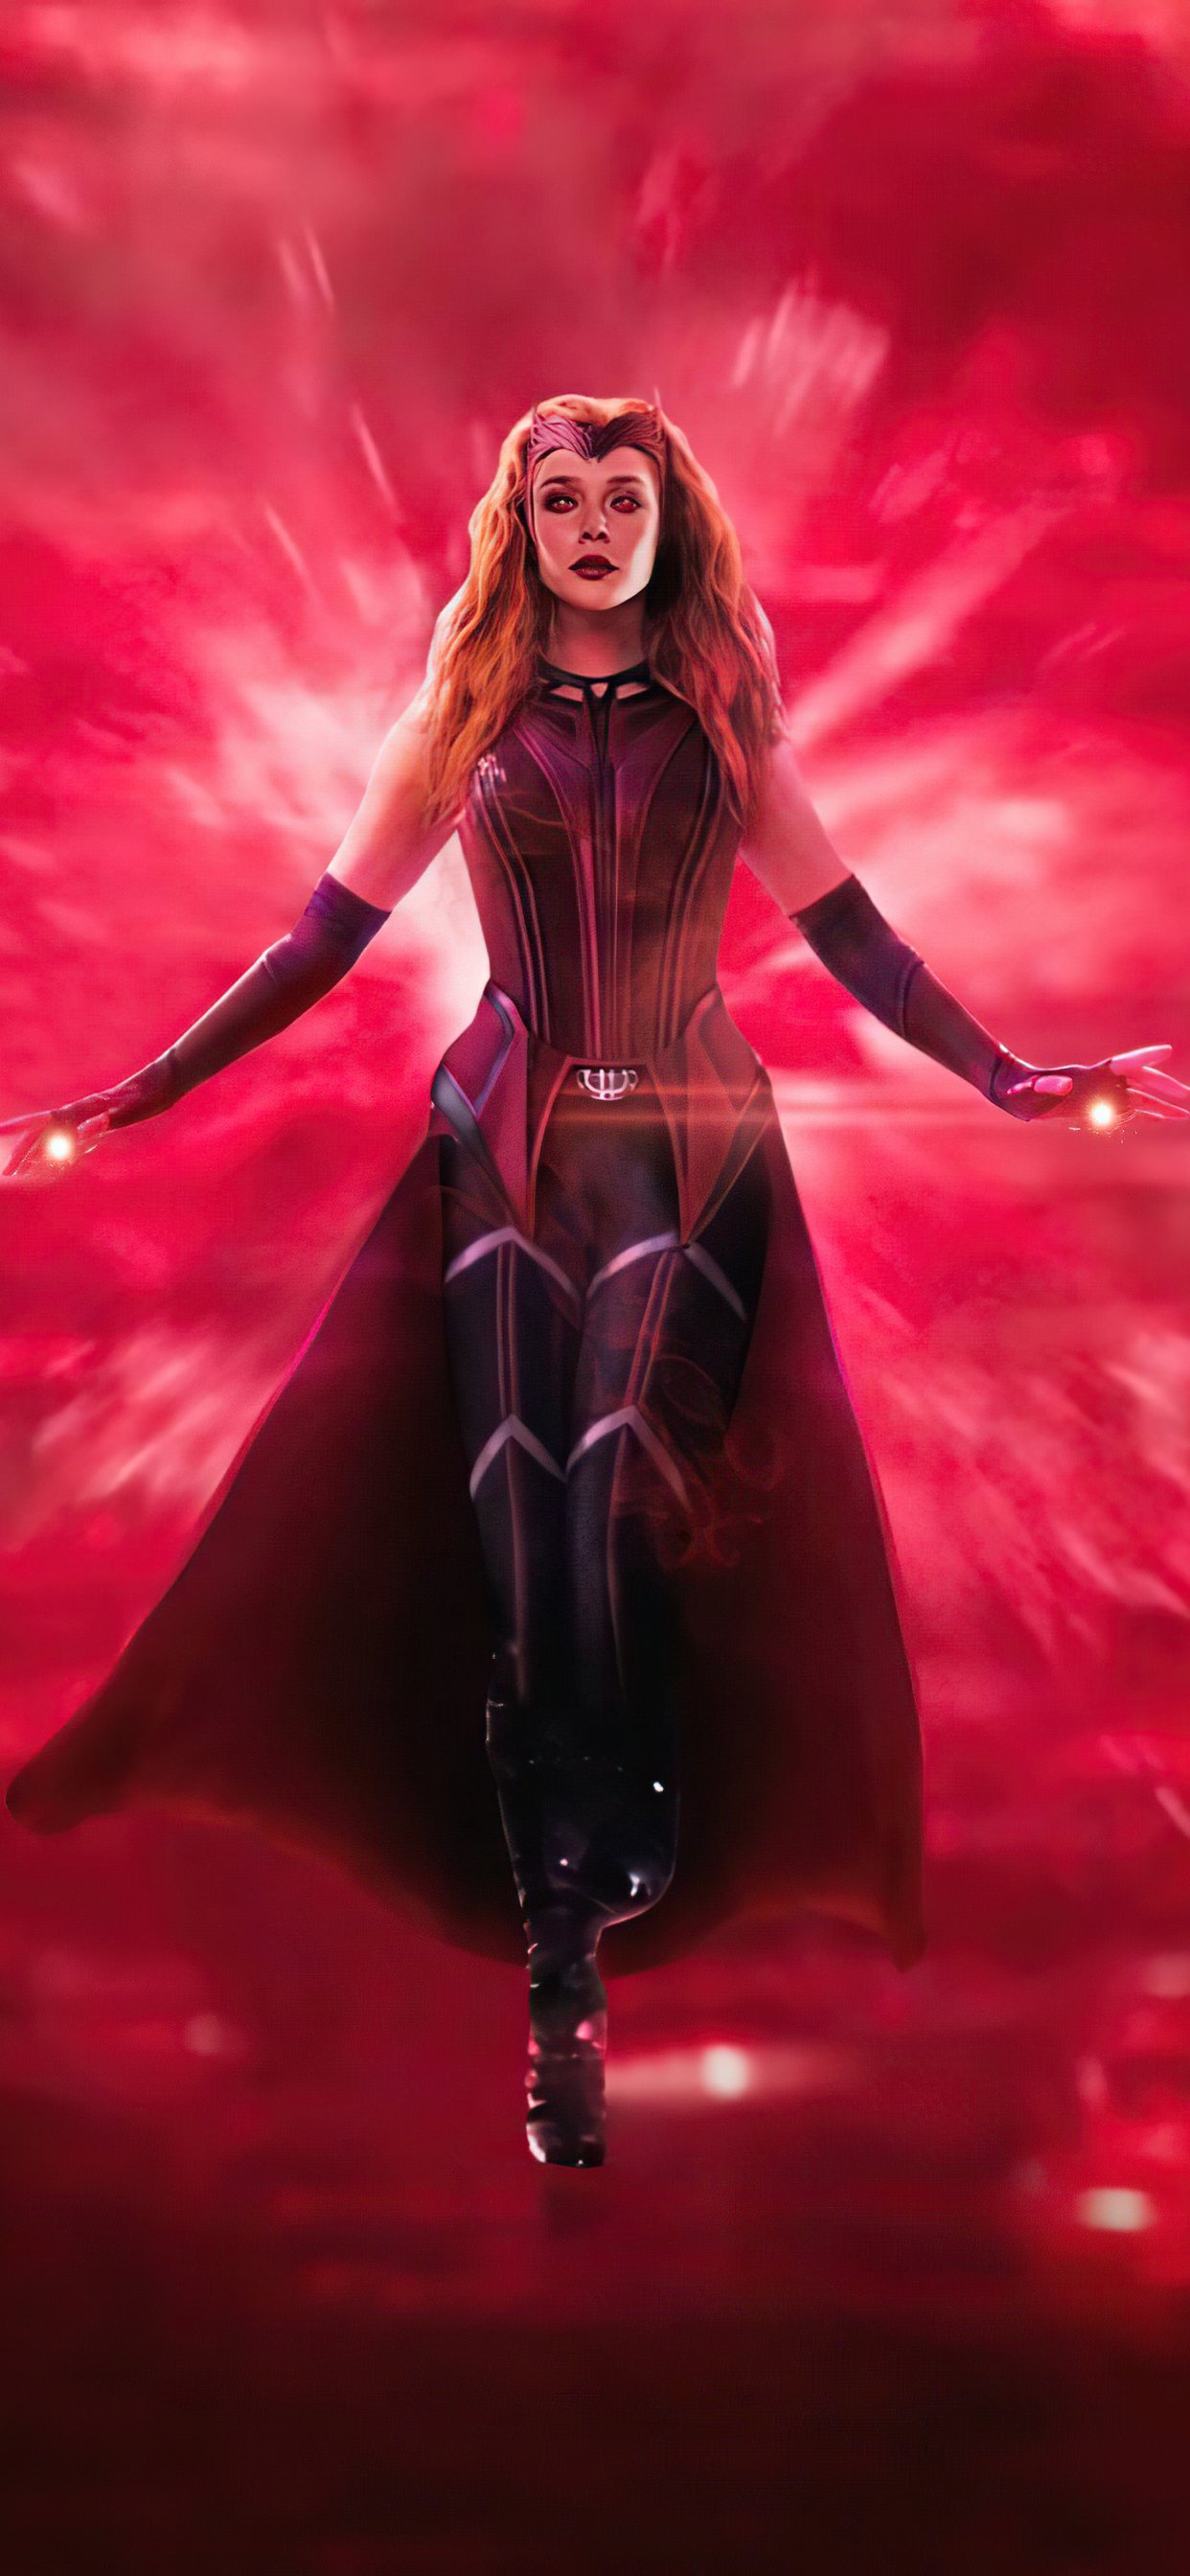 Scarlet Witch Wanda Vision Full Power Wallpaper Wallpaper Popular Scarlet Witch Wanda Vision Full Power Wallpaper Background